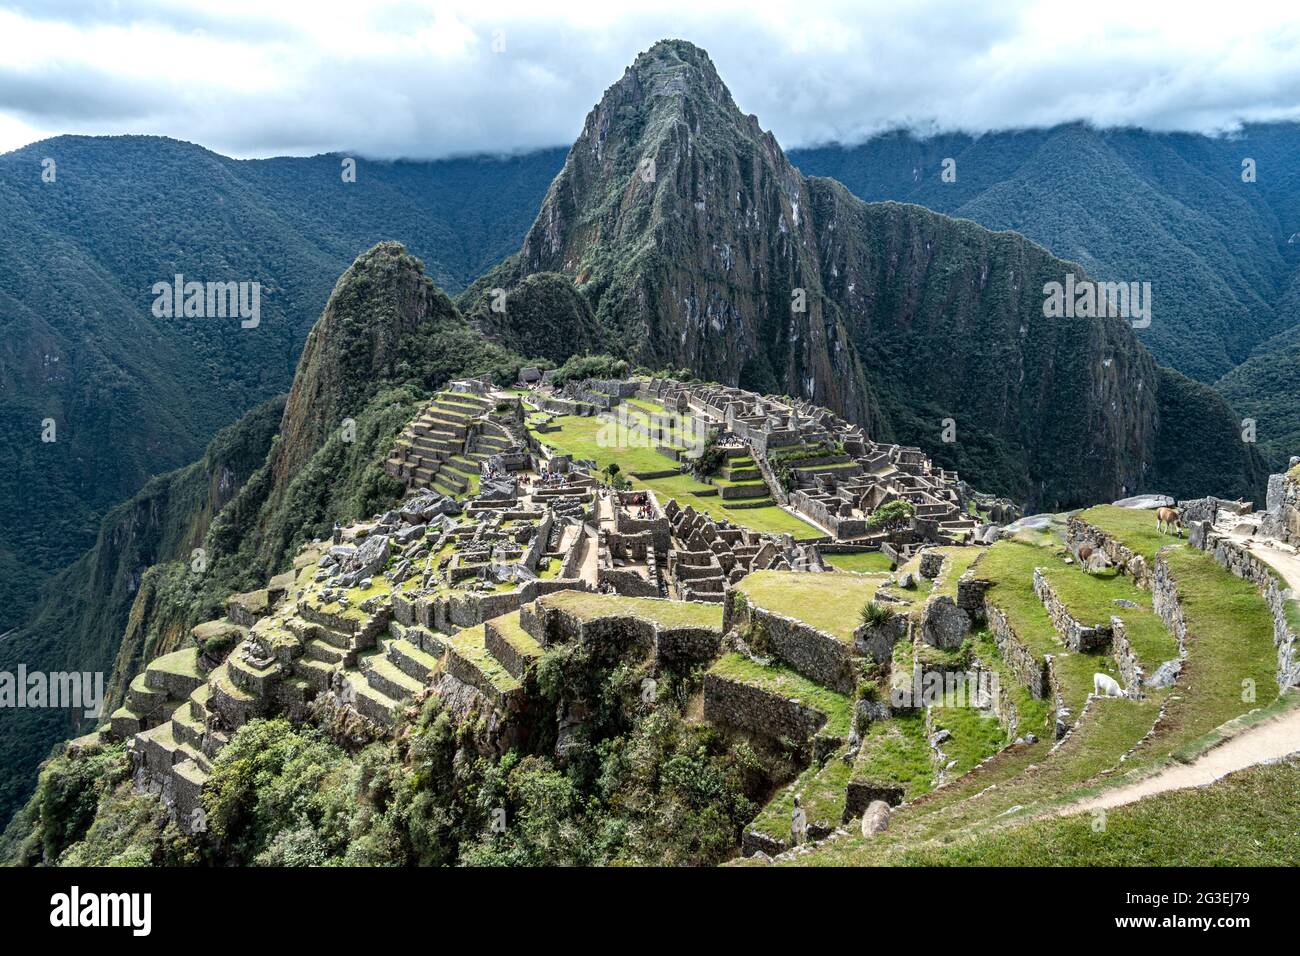 The classic view of Machu Picchu archaeological complex, Sacred Valley, Peru against a typical cloudy sky Stock Photo